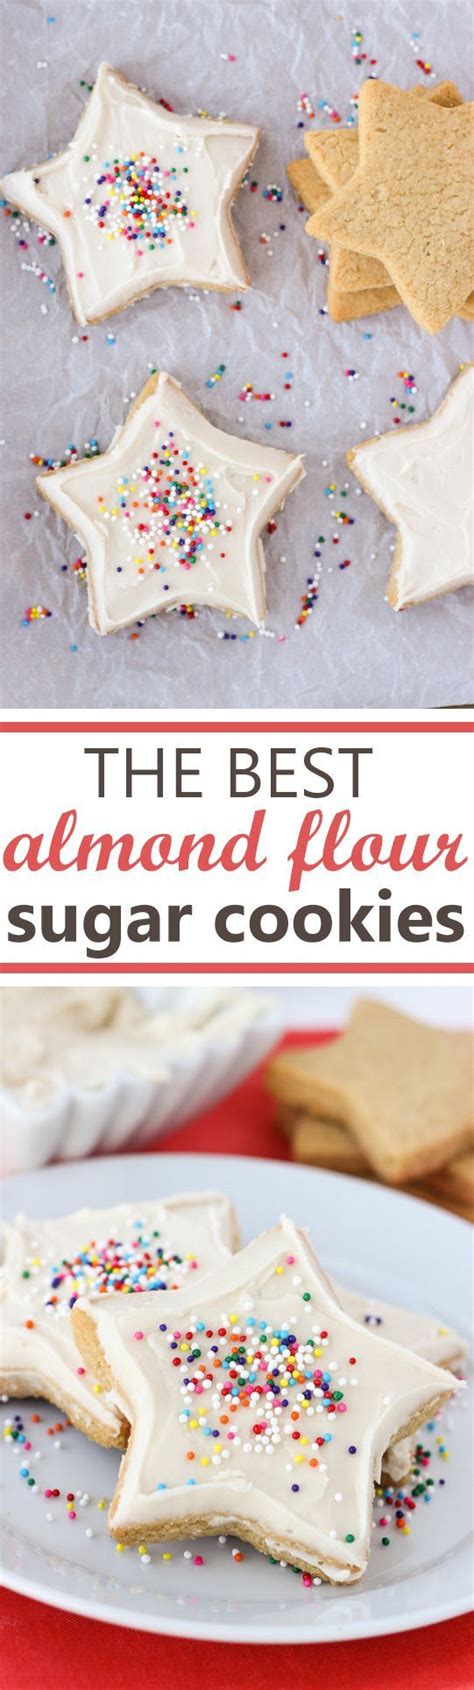 These almond flour shortbread cookies are among my favorites… and very shortly, they'll be yours, too. The Best Almond Flour Sugar Cookies (Gluten-Free, Grain-Free) | Recipe | Gluten free christmas ...